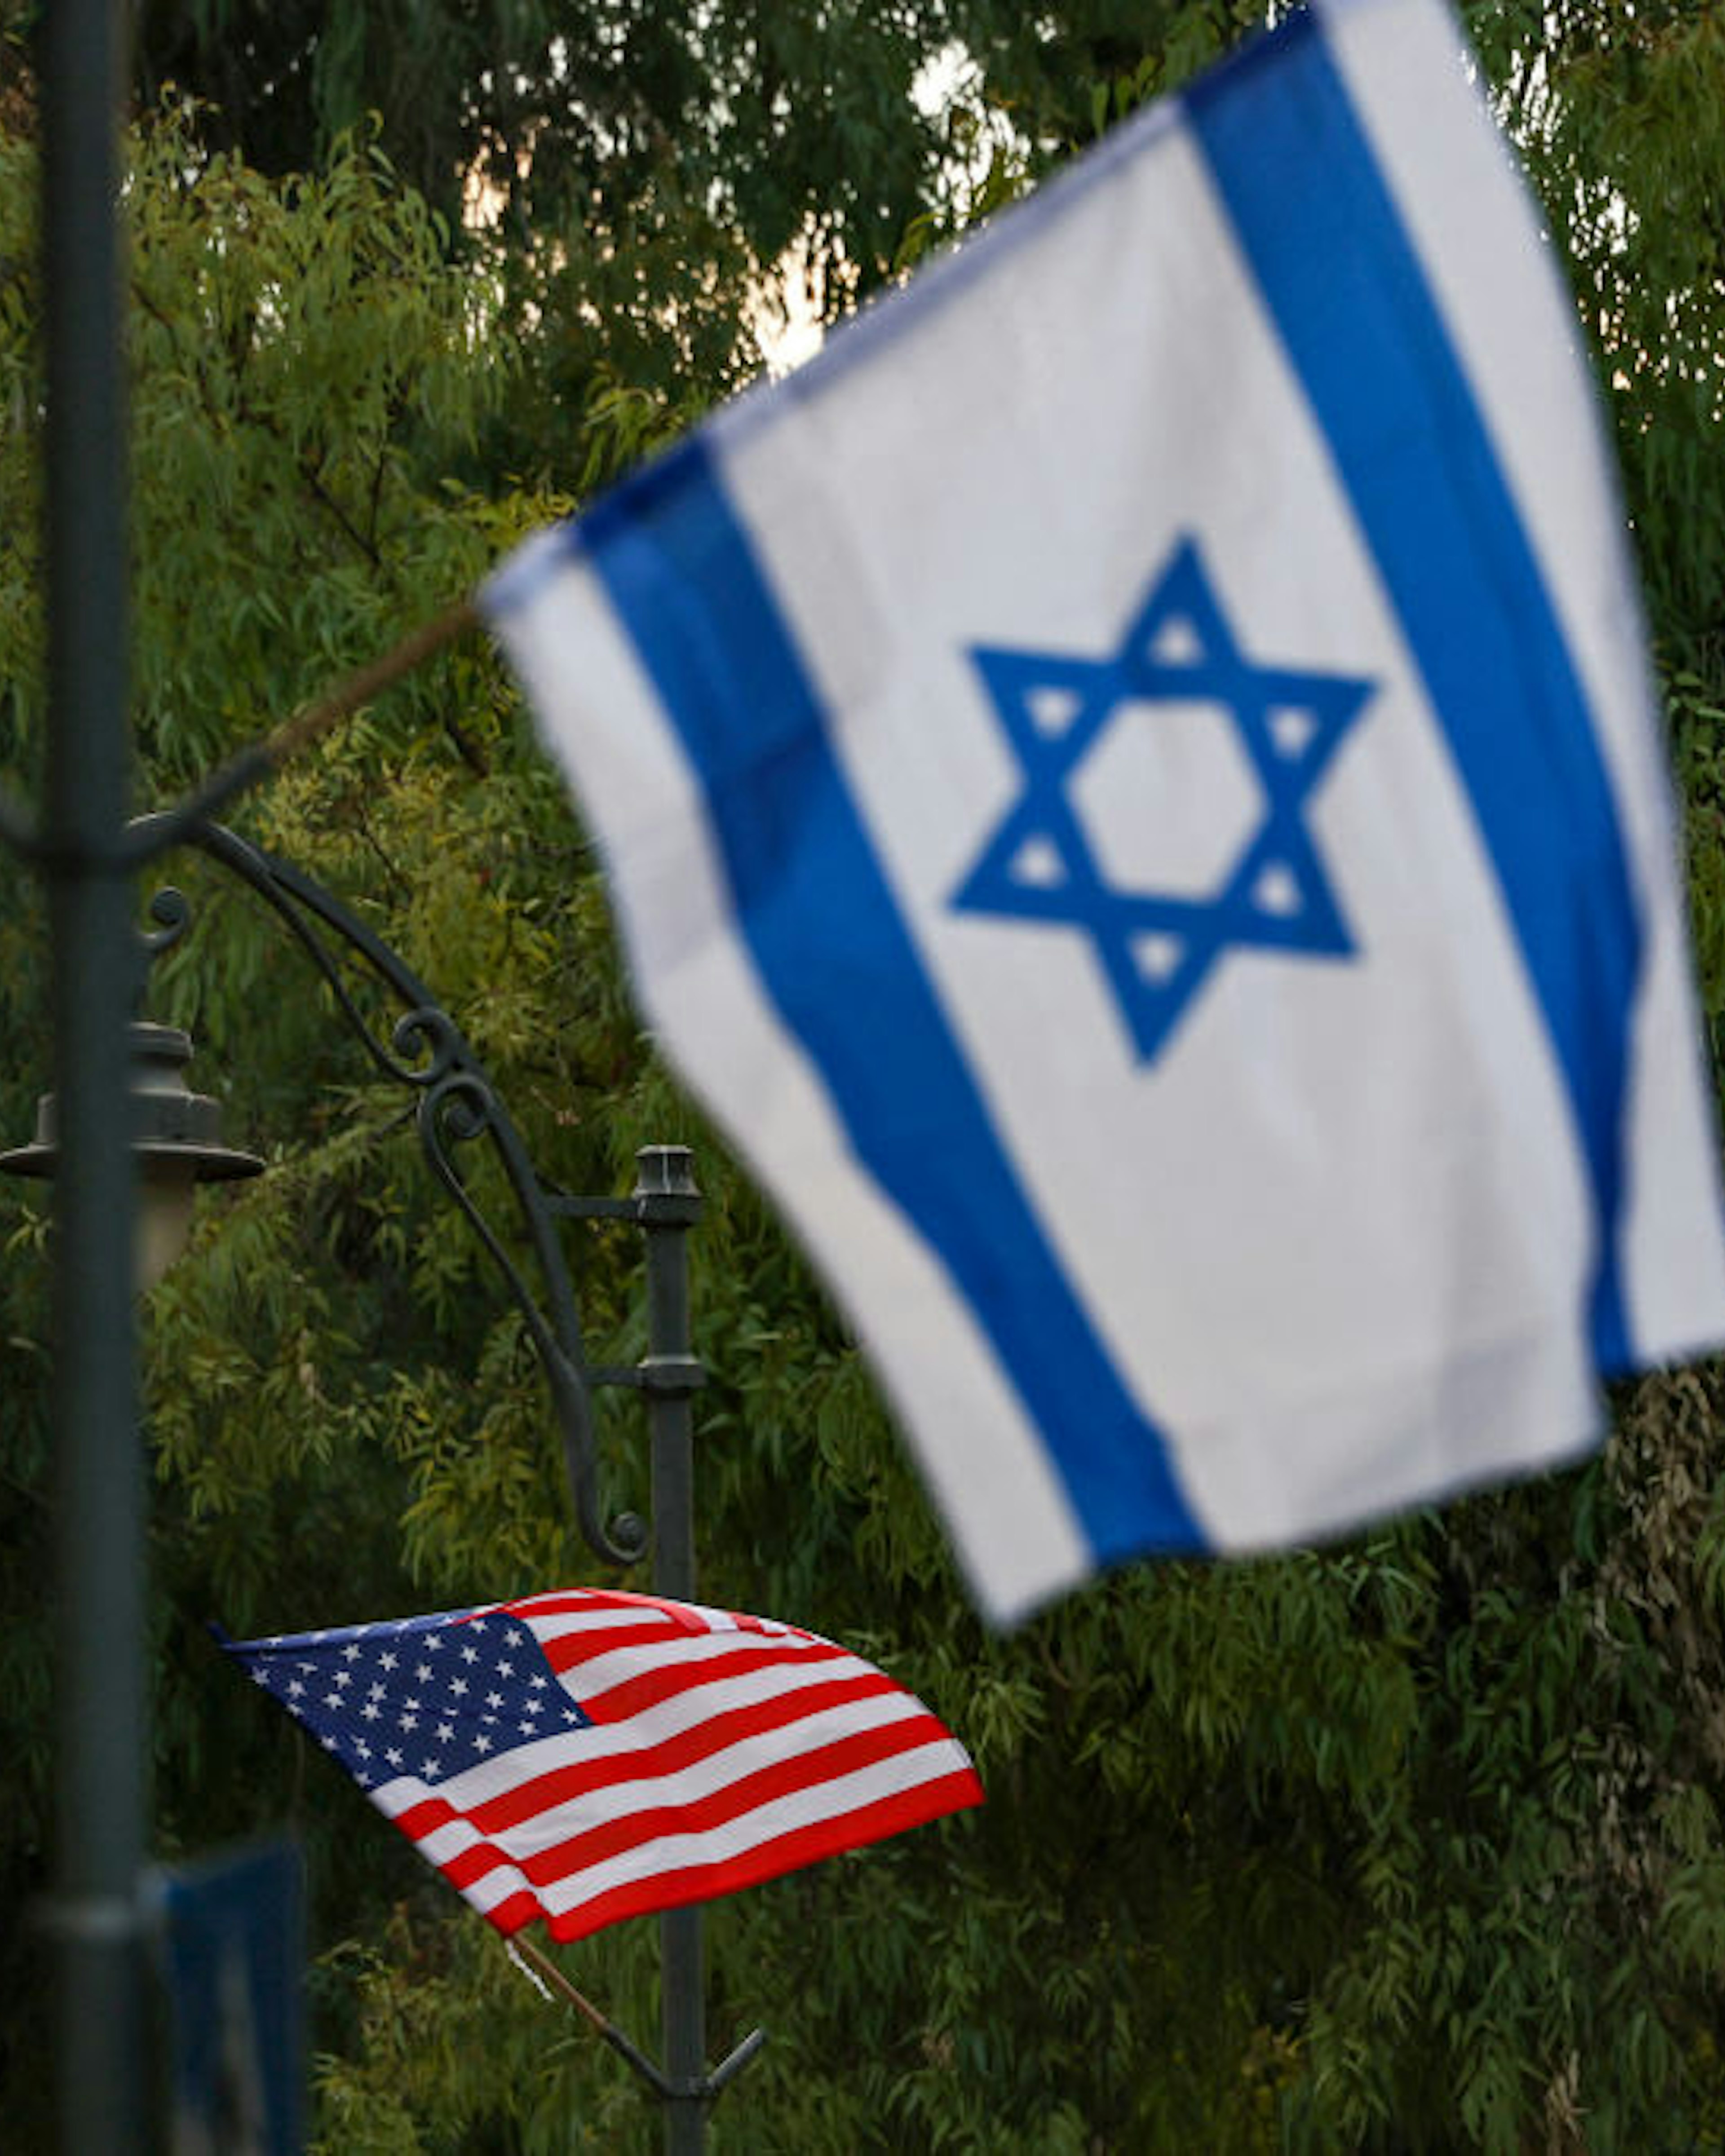 Flags of Israel and the US are hung up along streets by the Jerusalem municipality on July 10, 2022, ahead of US President Joe Biden's upcoming visit to Israel. (Photo by Ahmad GHARABLI / AFP) (Photo by AHMAD GHARABLI/AFP via Getty Images)